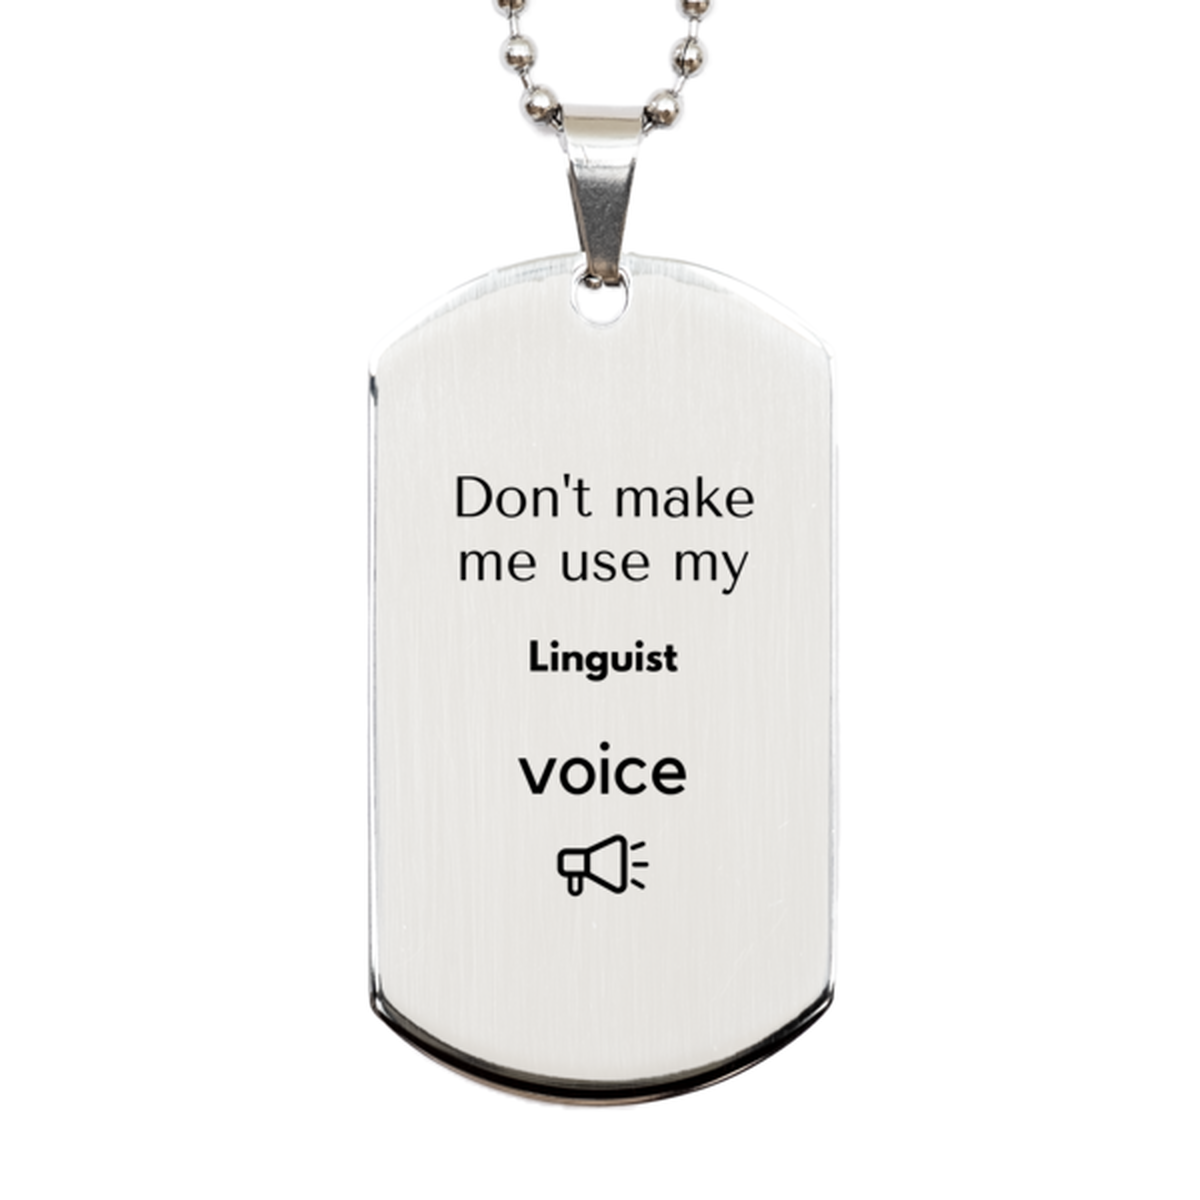 Don't make me use my Linguist voice, Sarcasm Linguist Gifts, Christmas Linguist Silver Dog Tag Birthday Unique Gifts For Linguist Coworkers, Men, Women, Colleague, Friends